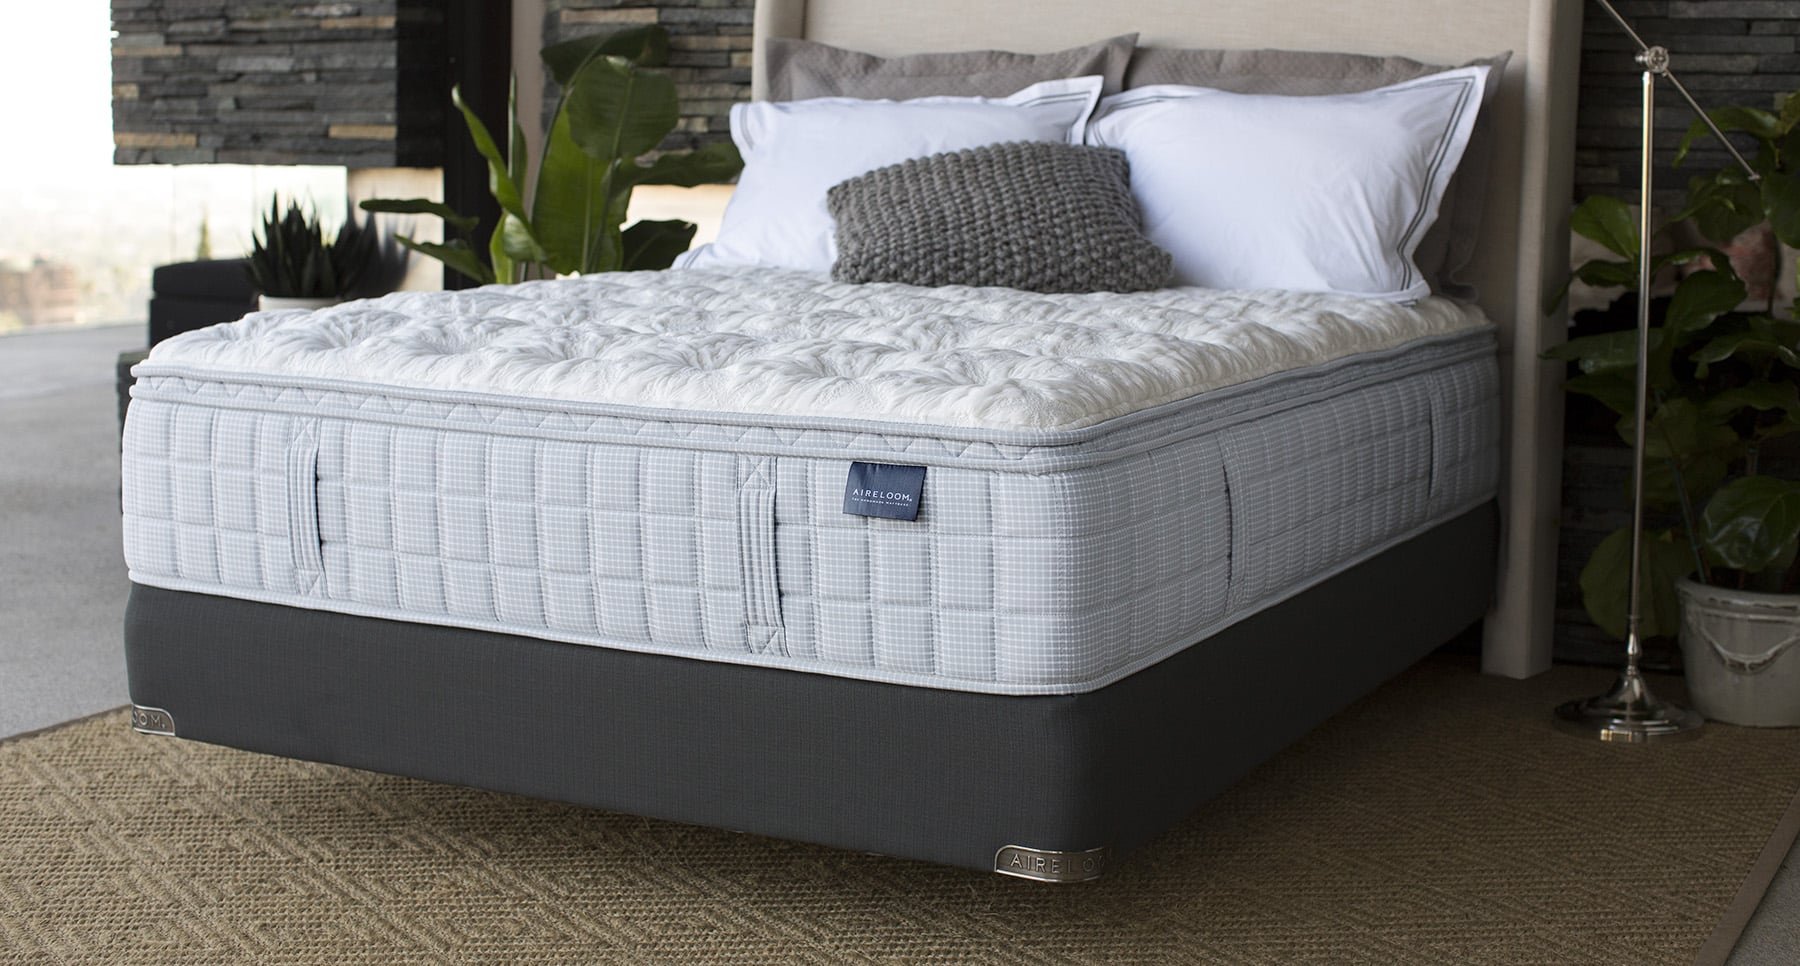 aireloom mattresses for sale